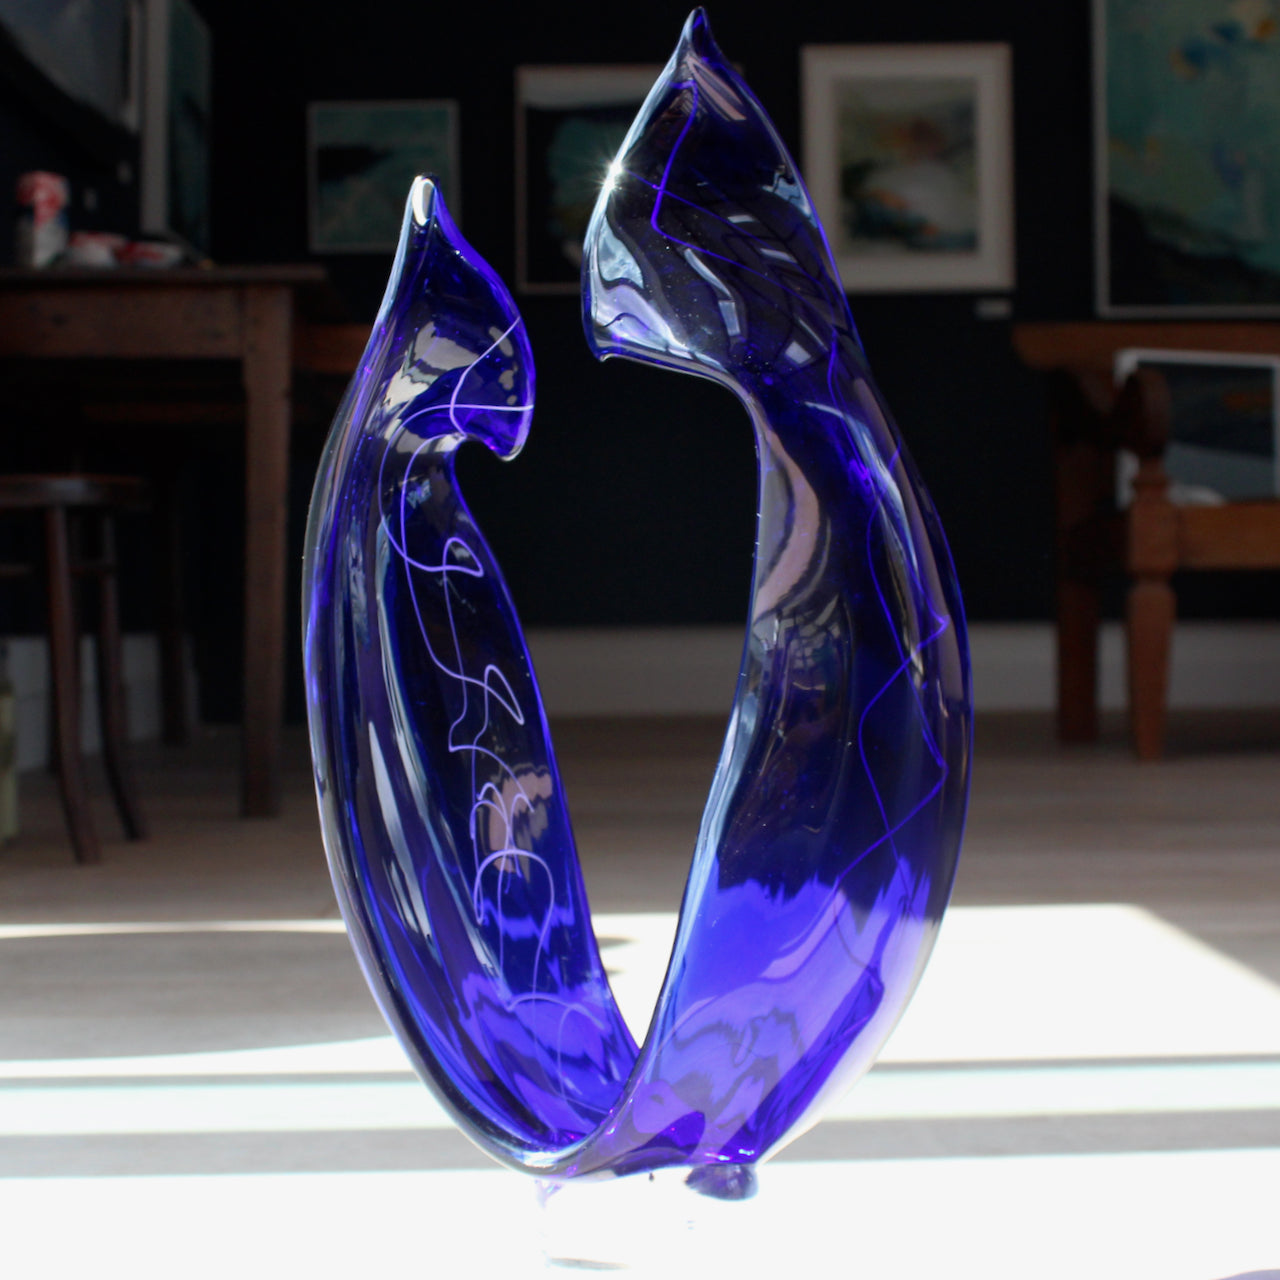 tall blue glass sculpture with white detail by glass artist Benjamin Lintell 